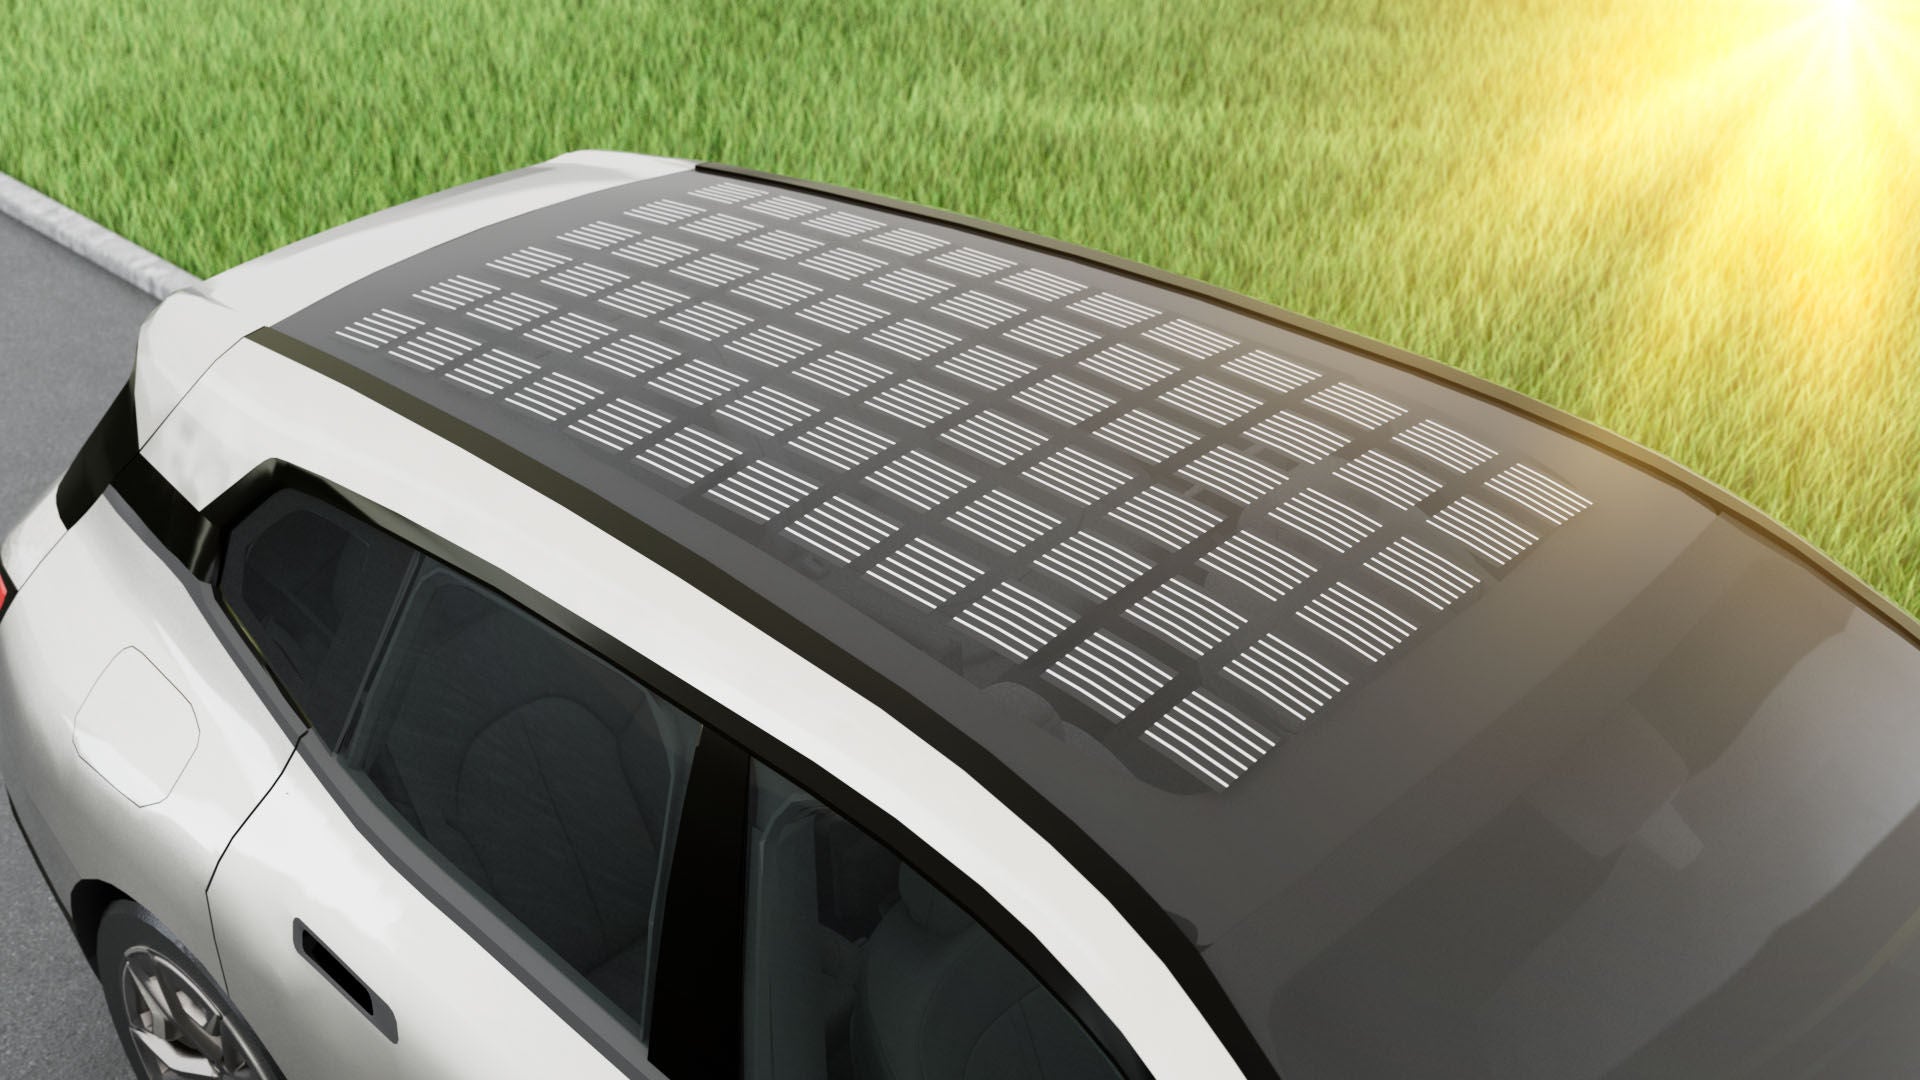 Integrated solar cells in the glass roof of the vehicle